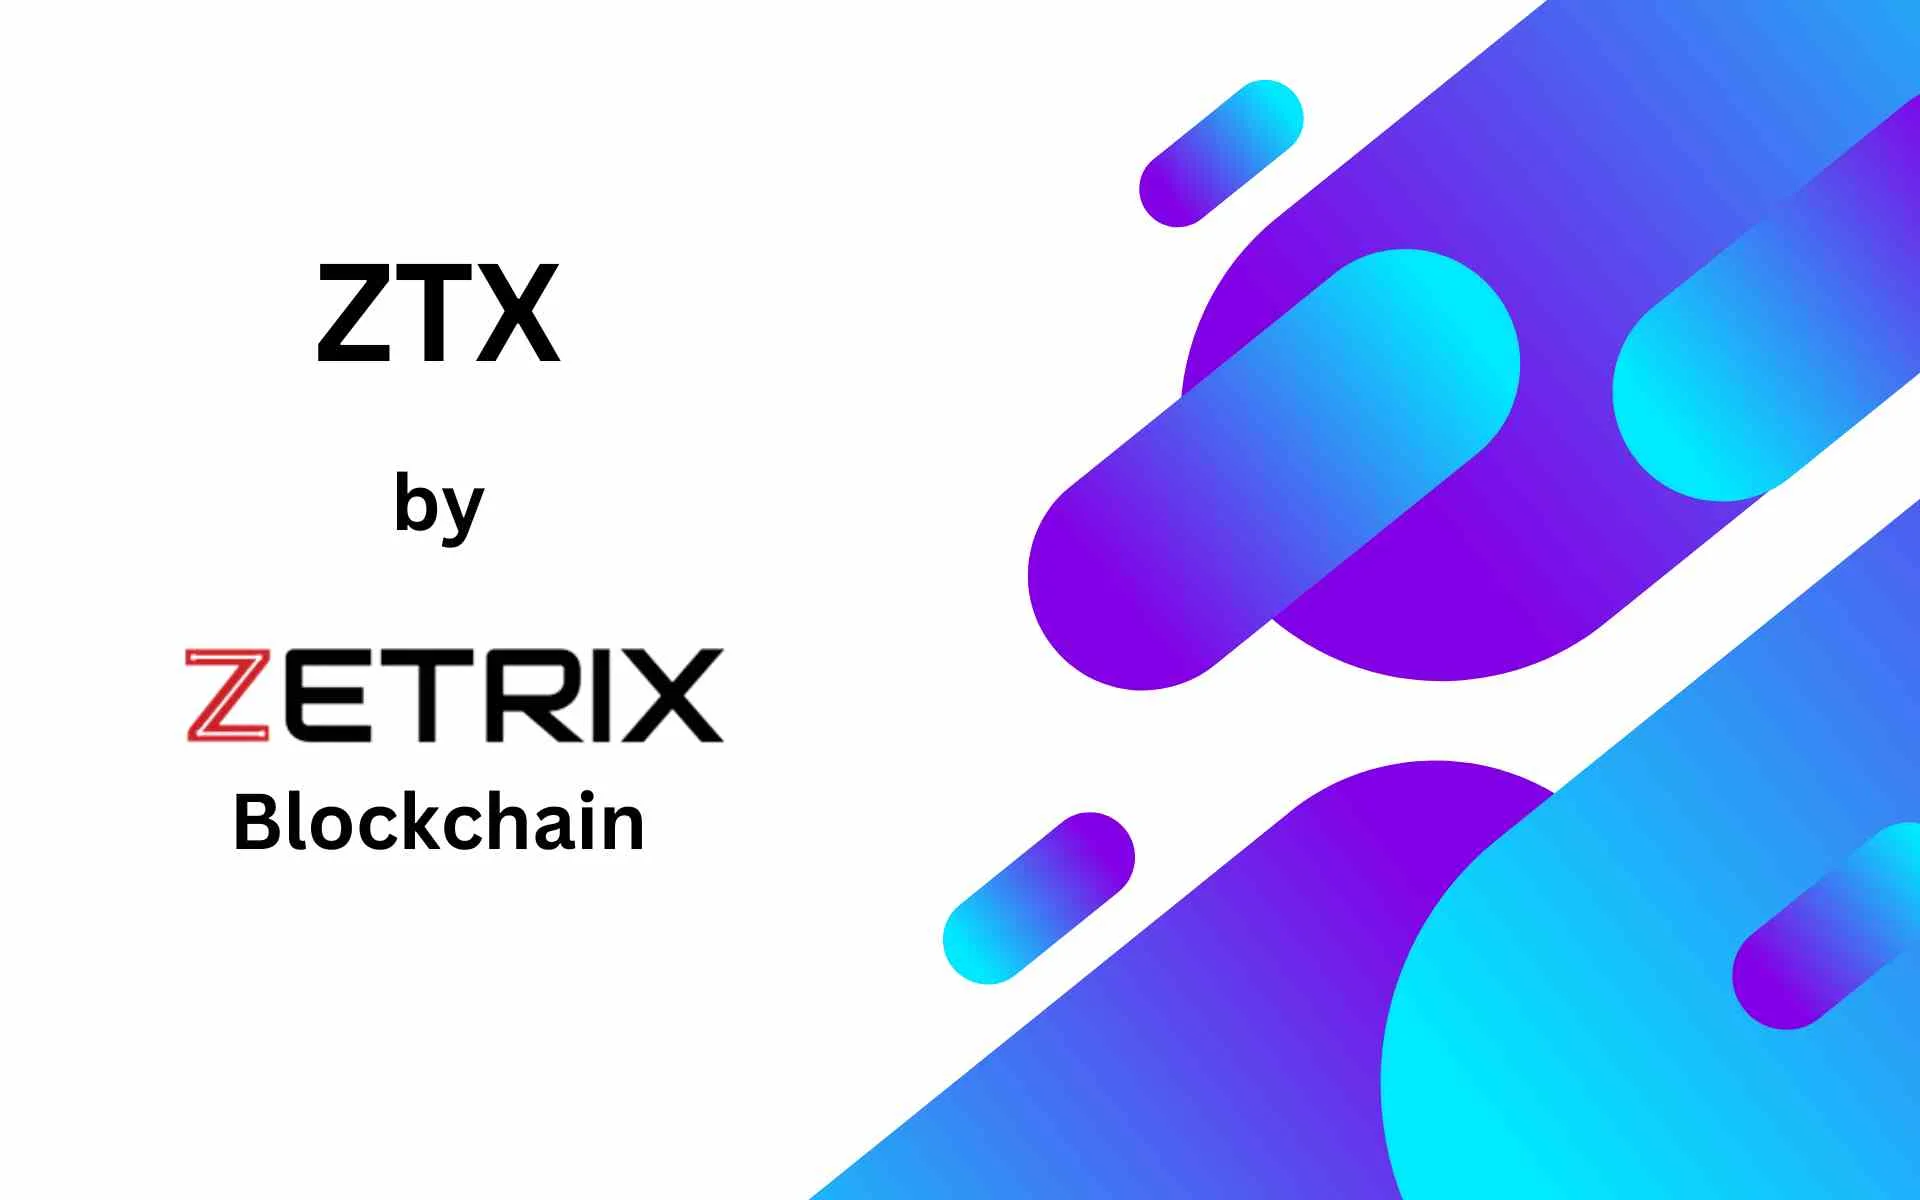 What is ZTX